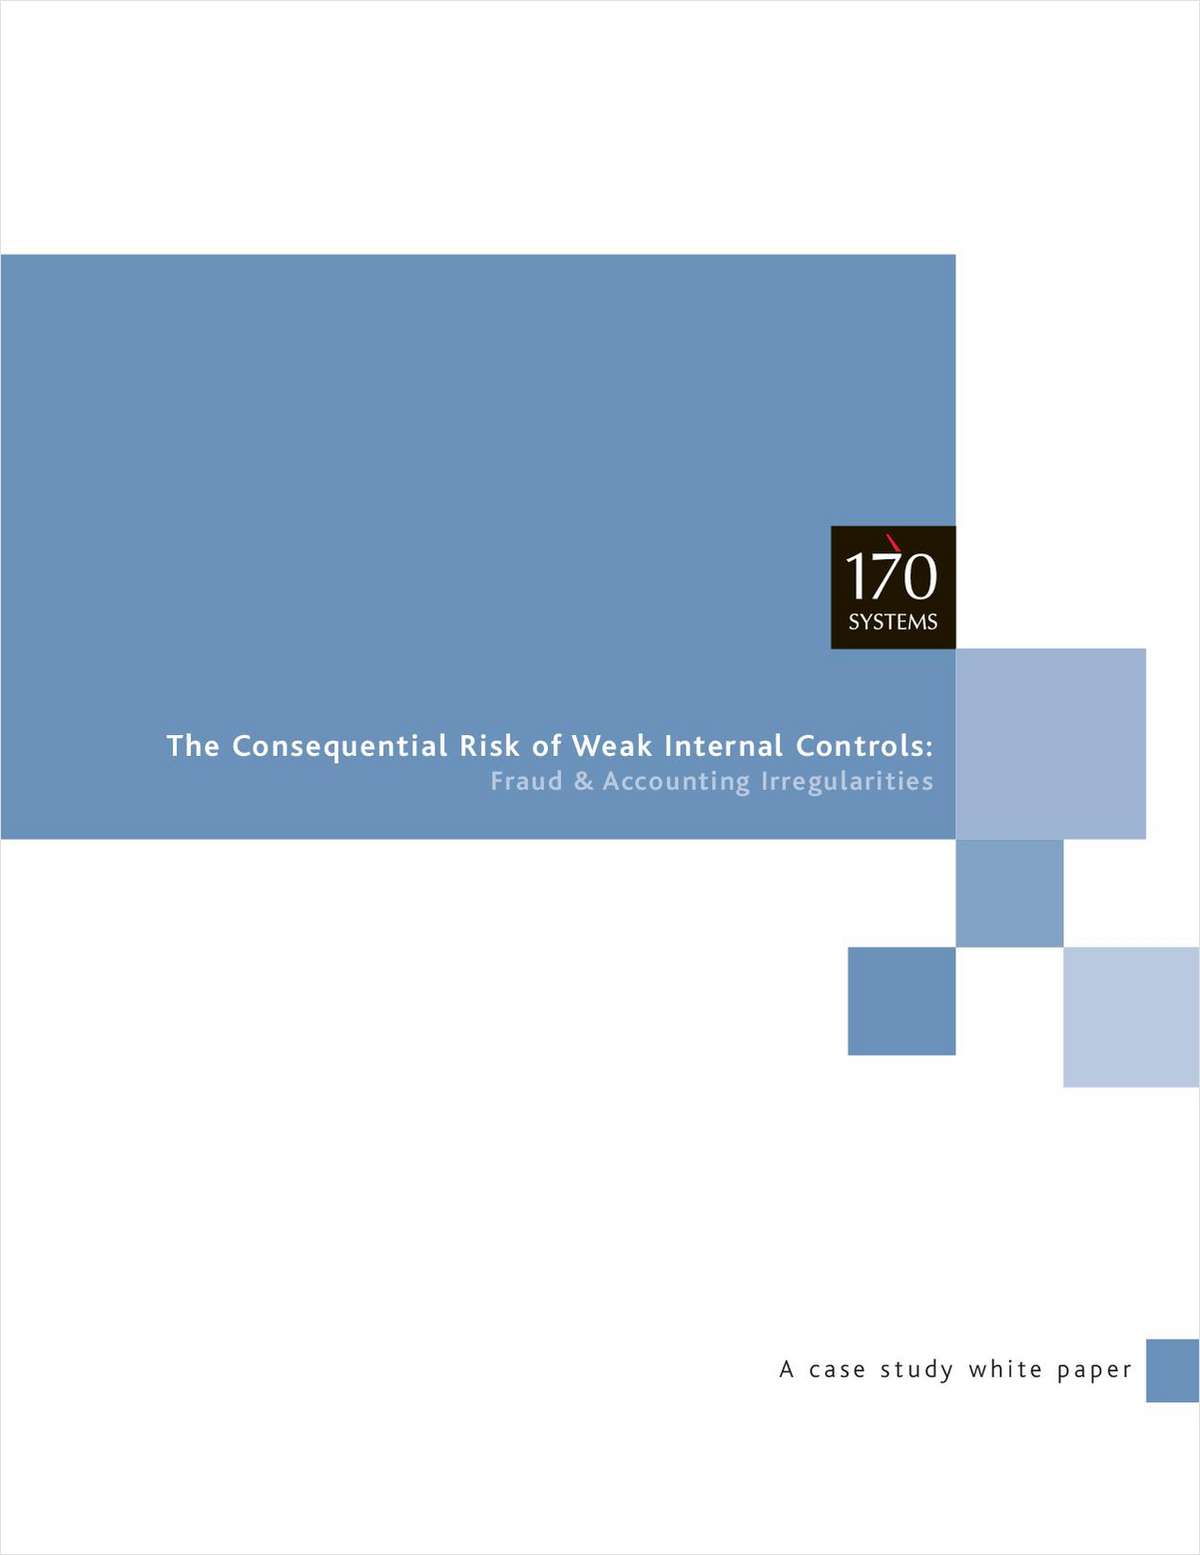 The Consequential Risk Of Weak Internal Controls: Fraud and Accounting Irregularities